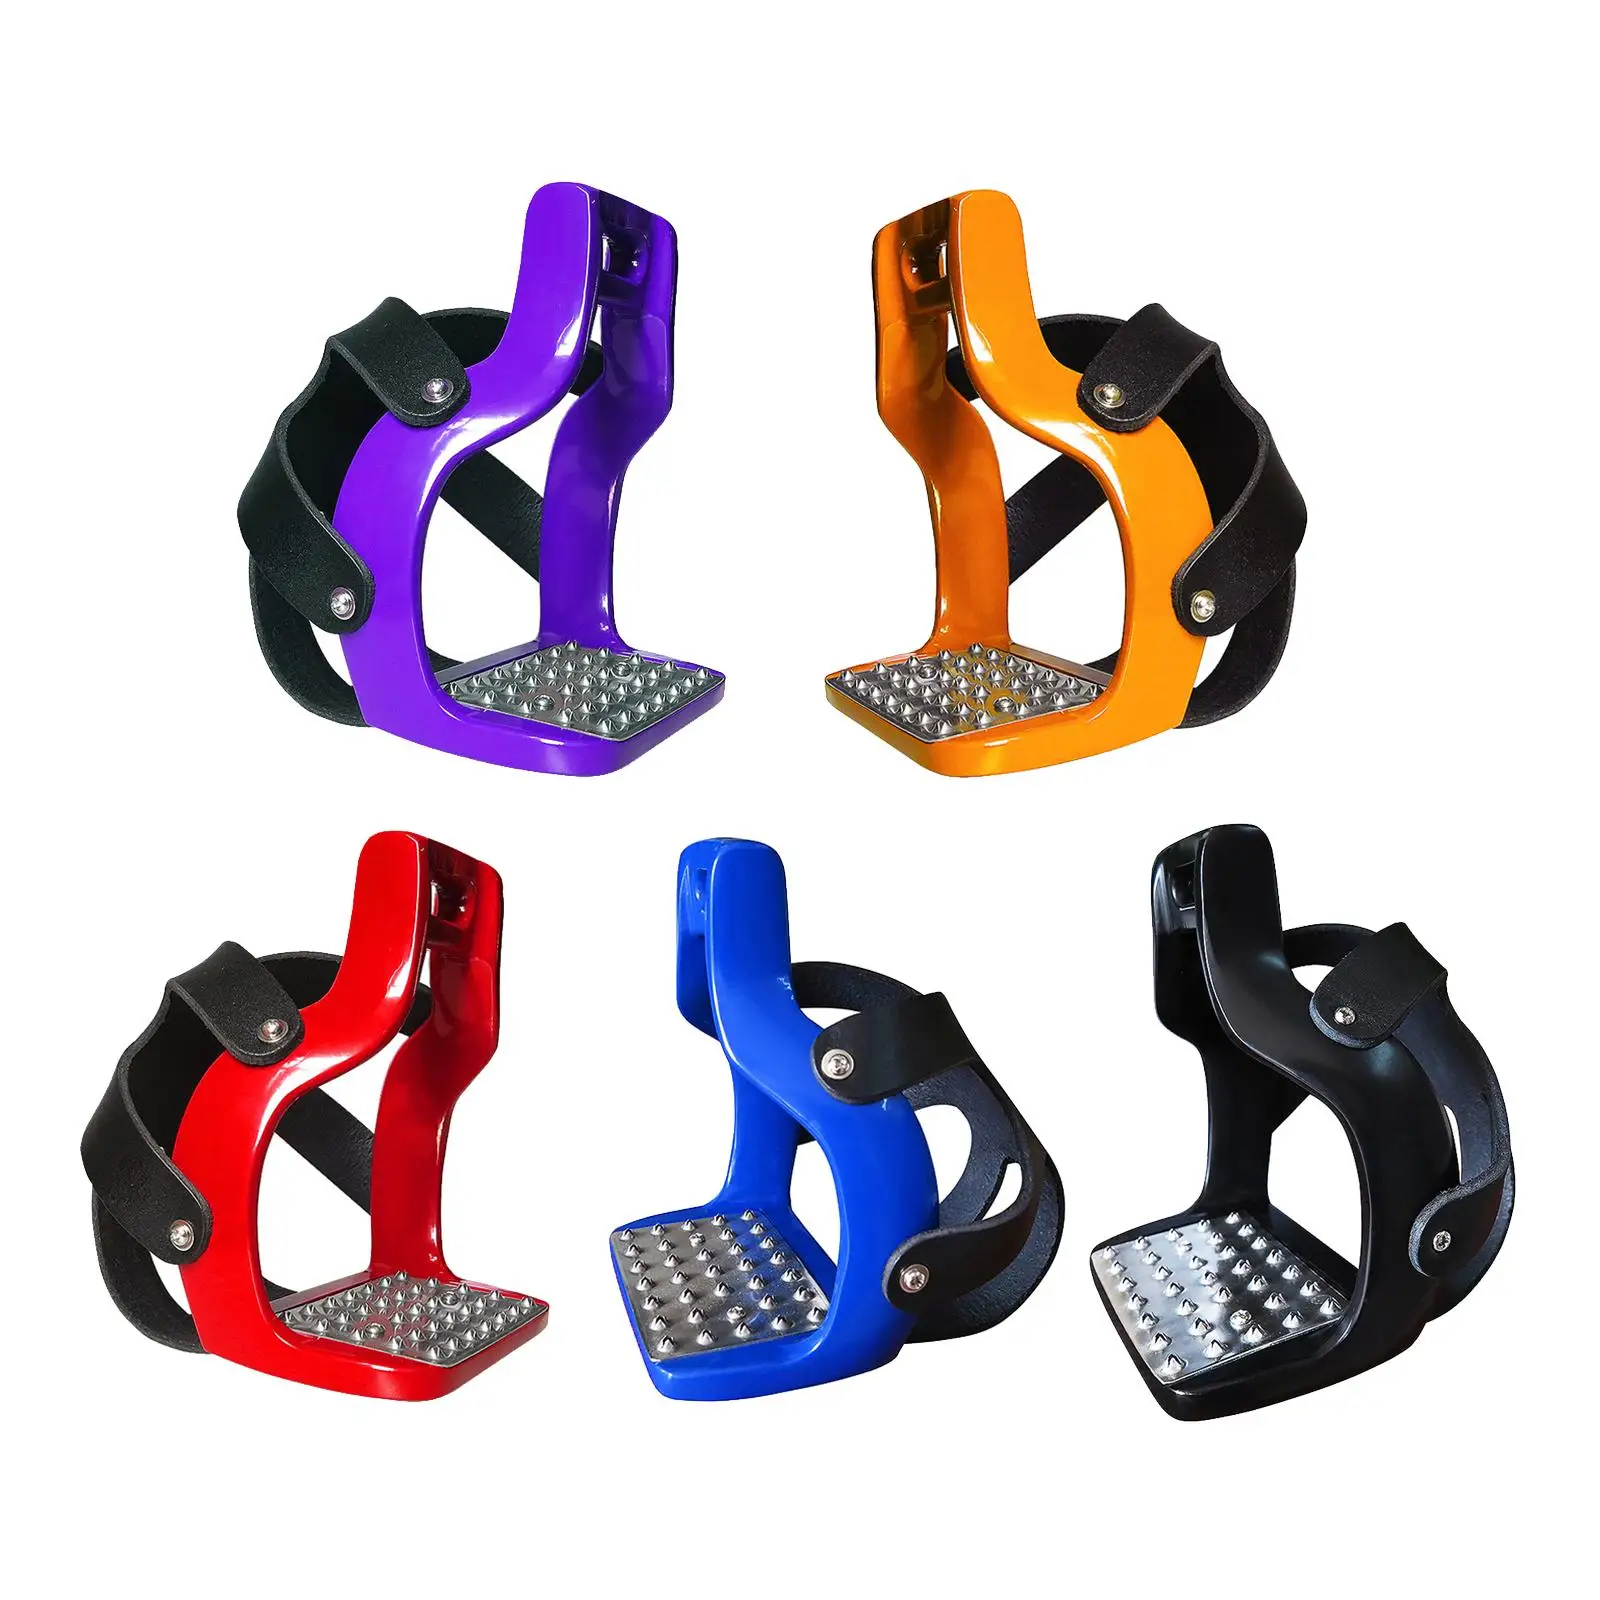 1 Pair Die-Cast Aluminum Saddle Stirrup Pedal Wear?Resistant Comfortable Safe Horse Riding Equipment with Net Cover